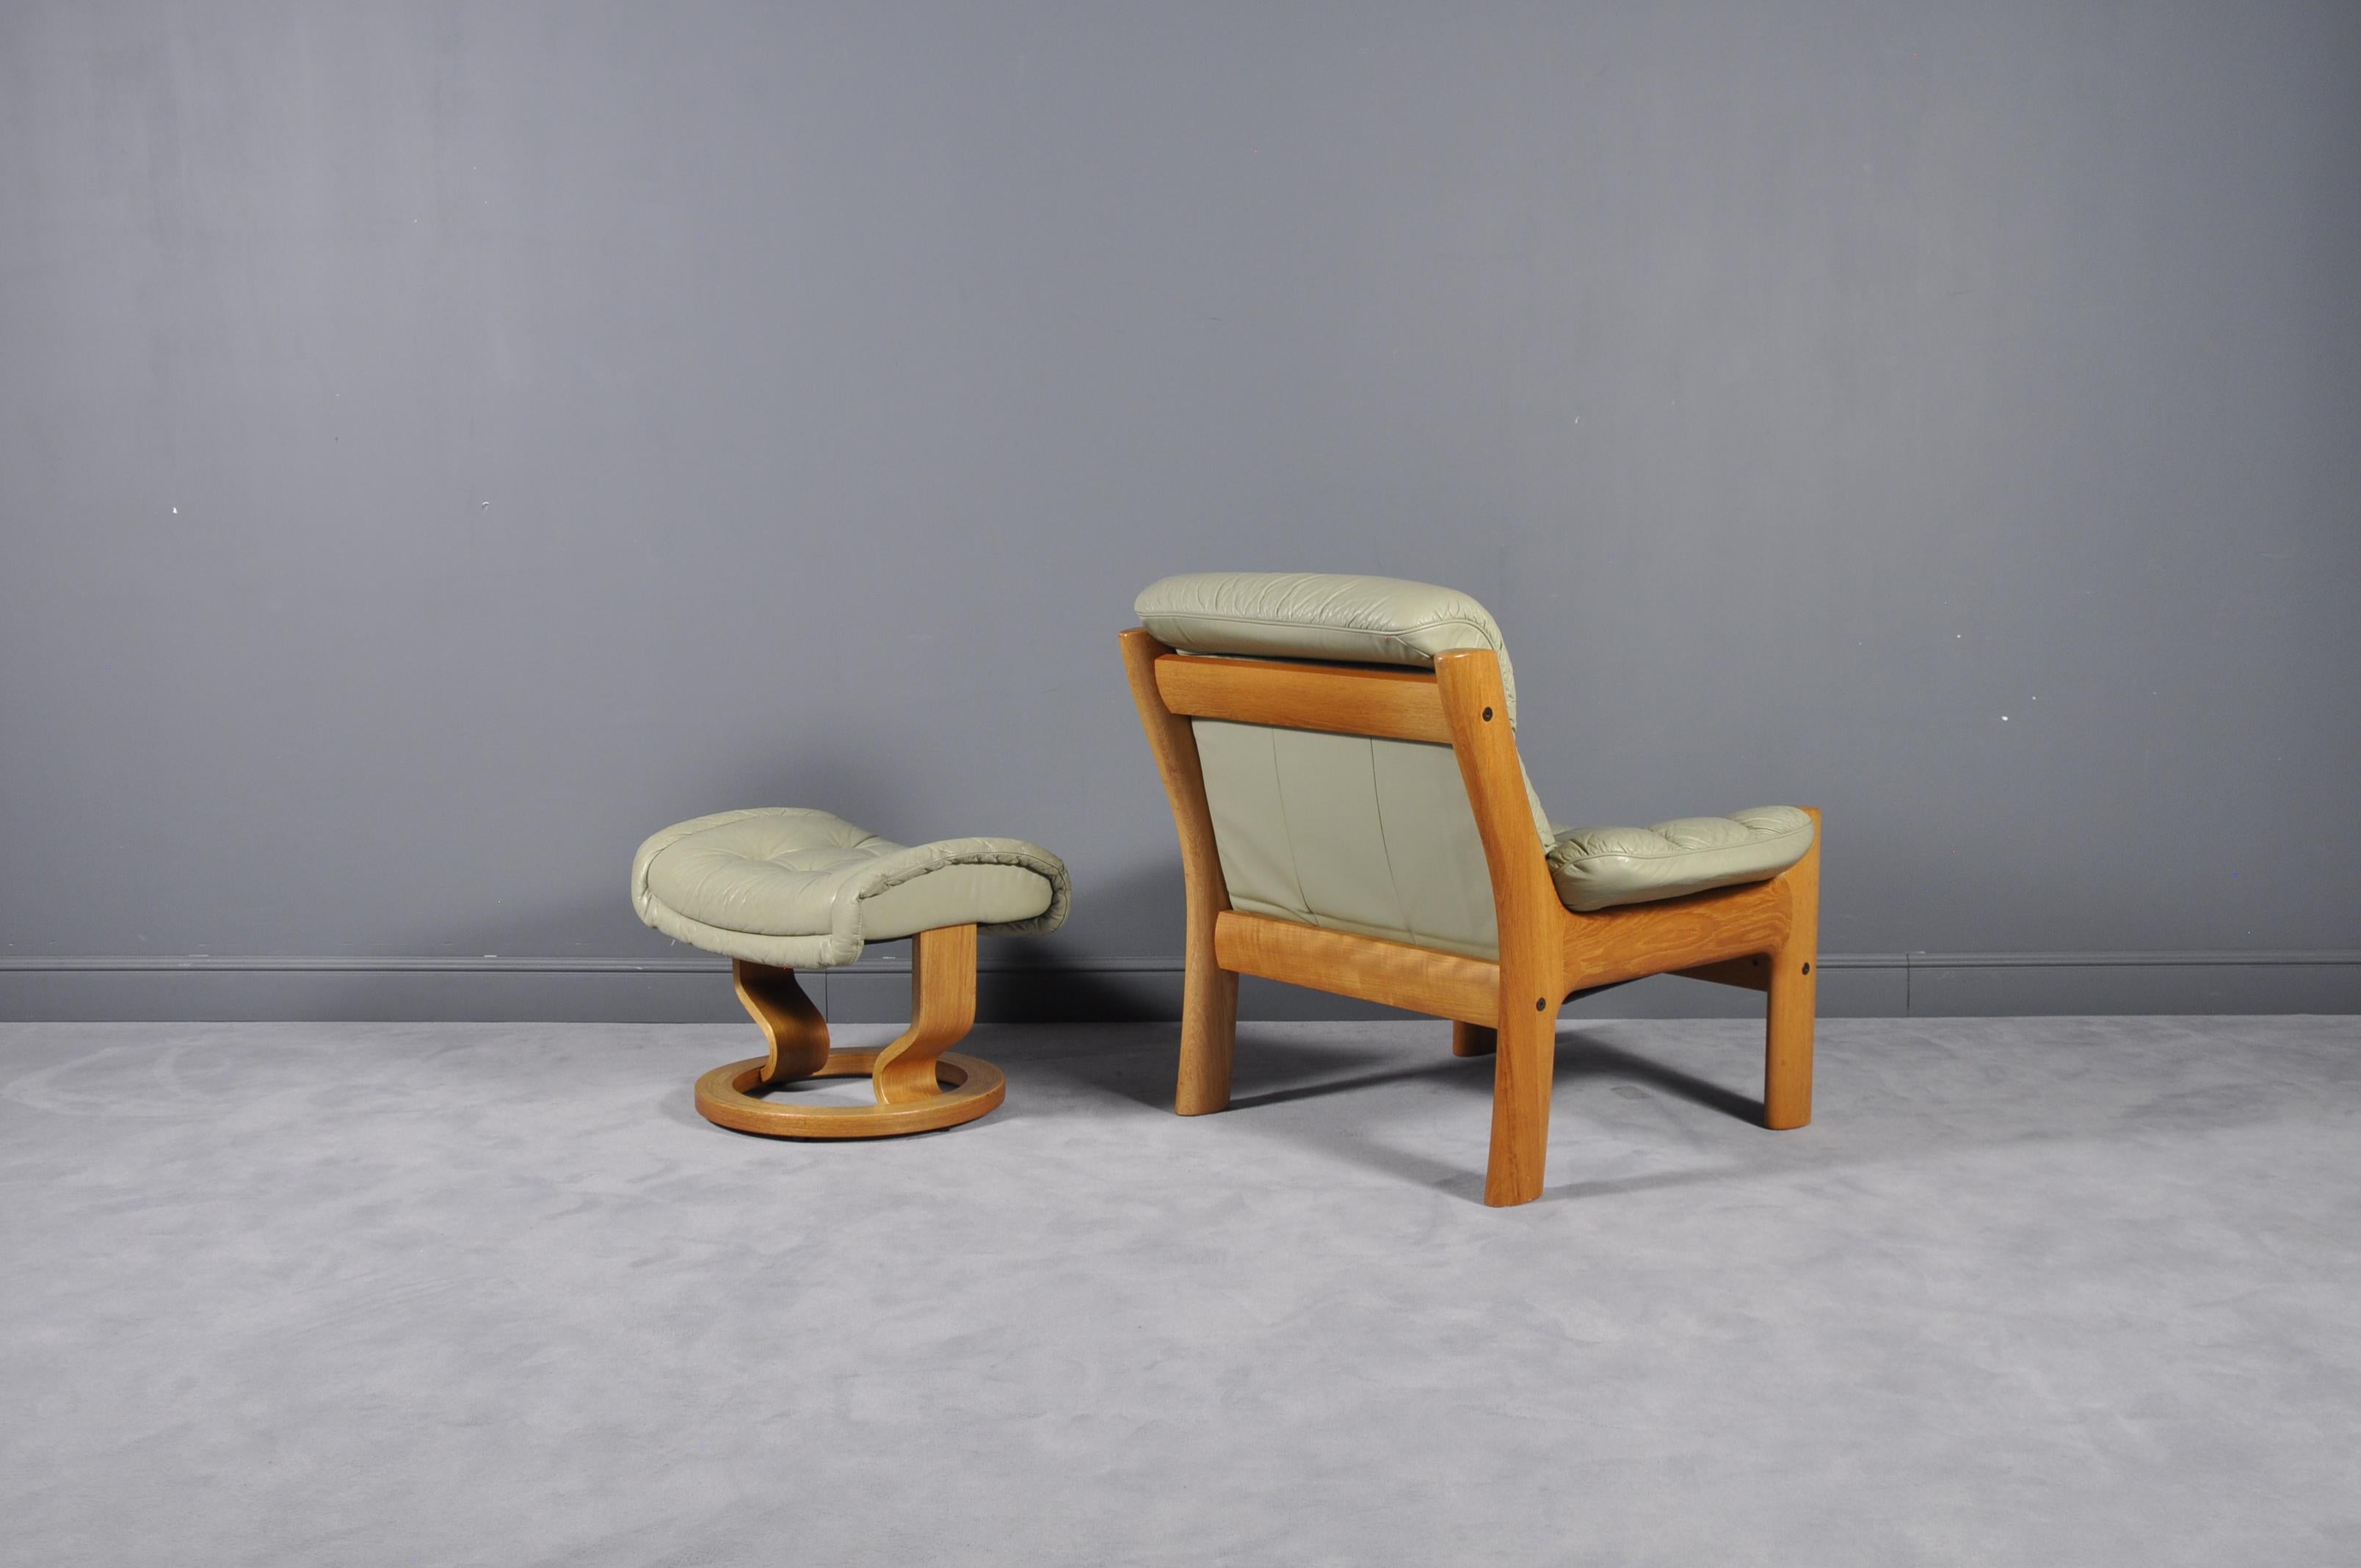 Scandinavian Modern Montana Leather Lounge Chair and Ottoman by J.E. Ekornes, Norway, circa 1970s For Sale